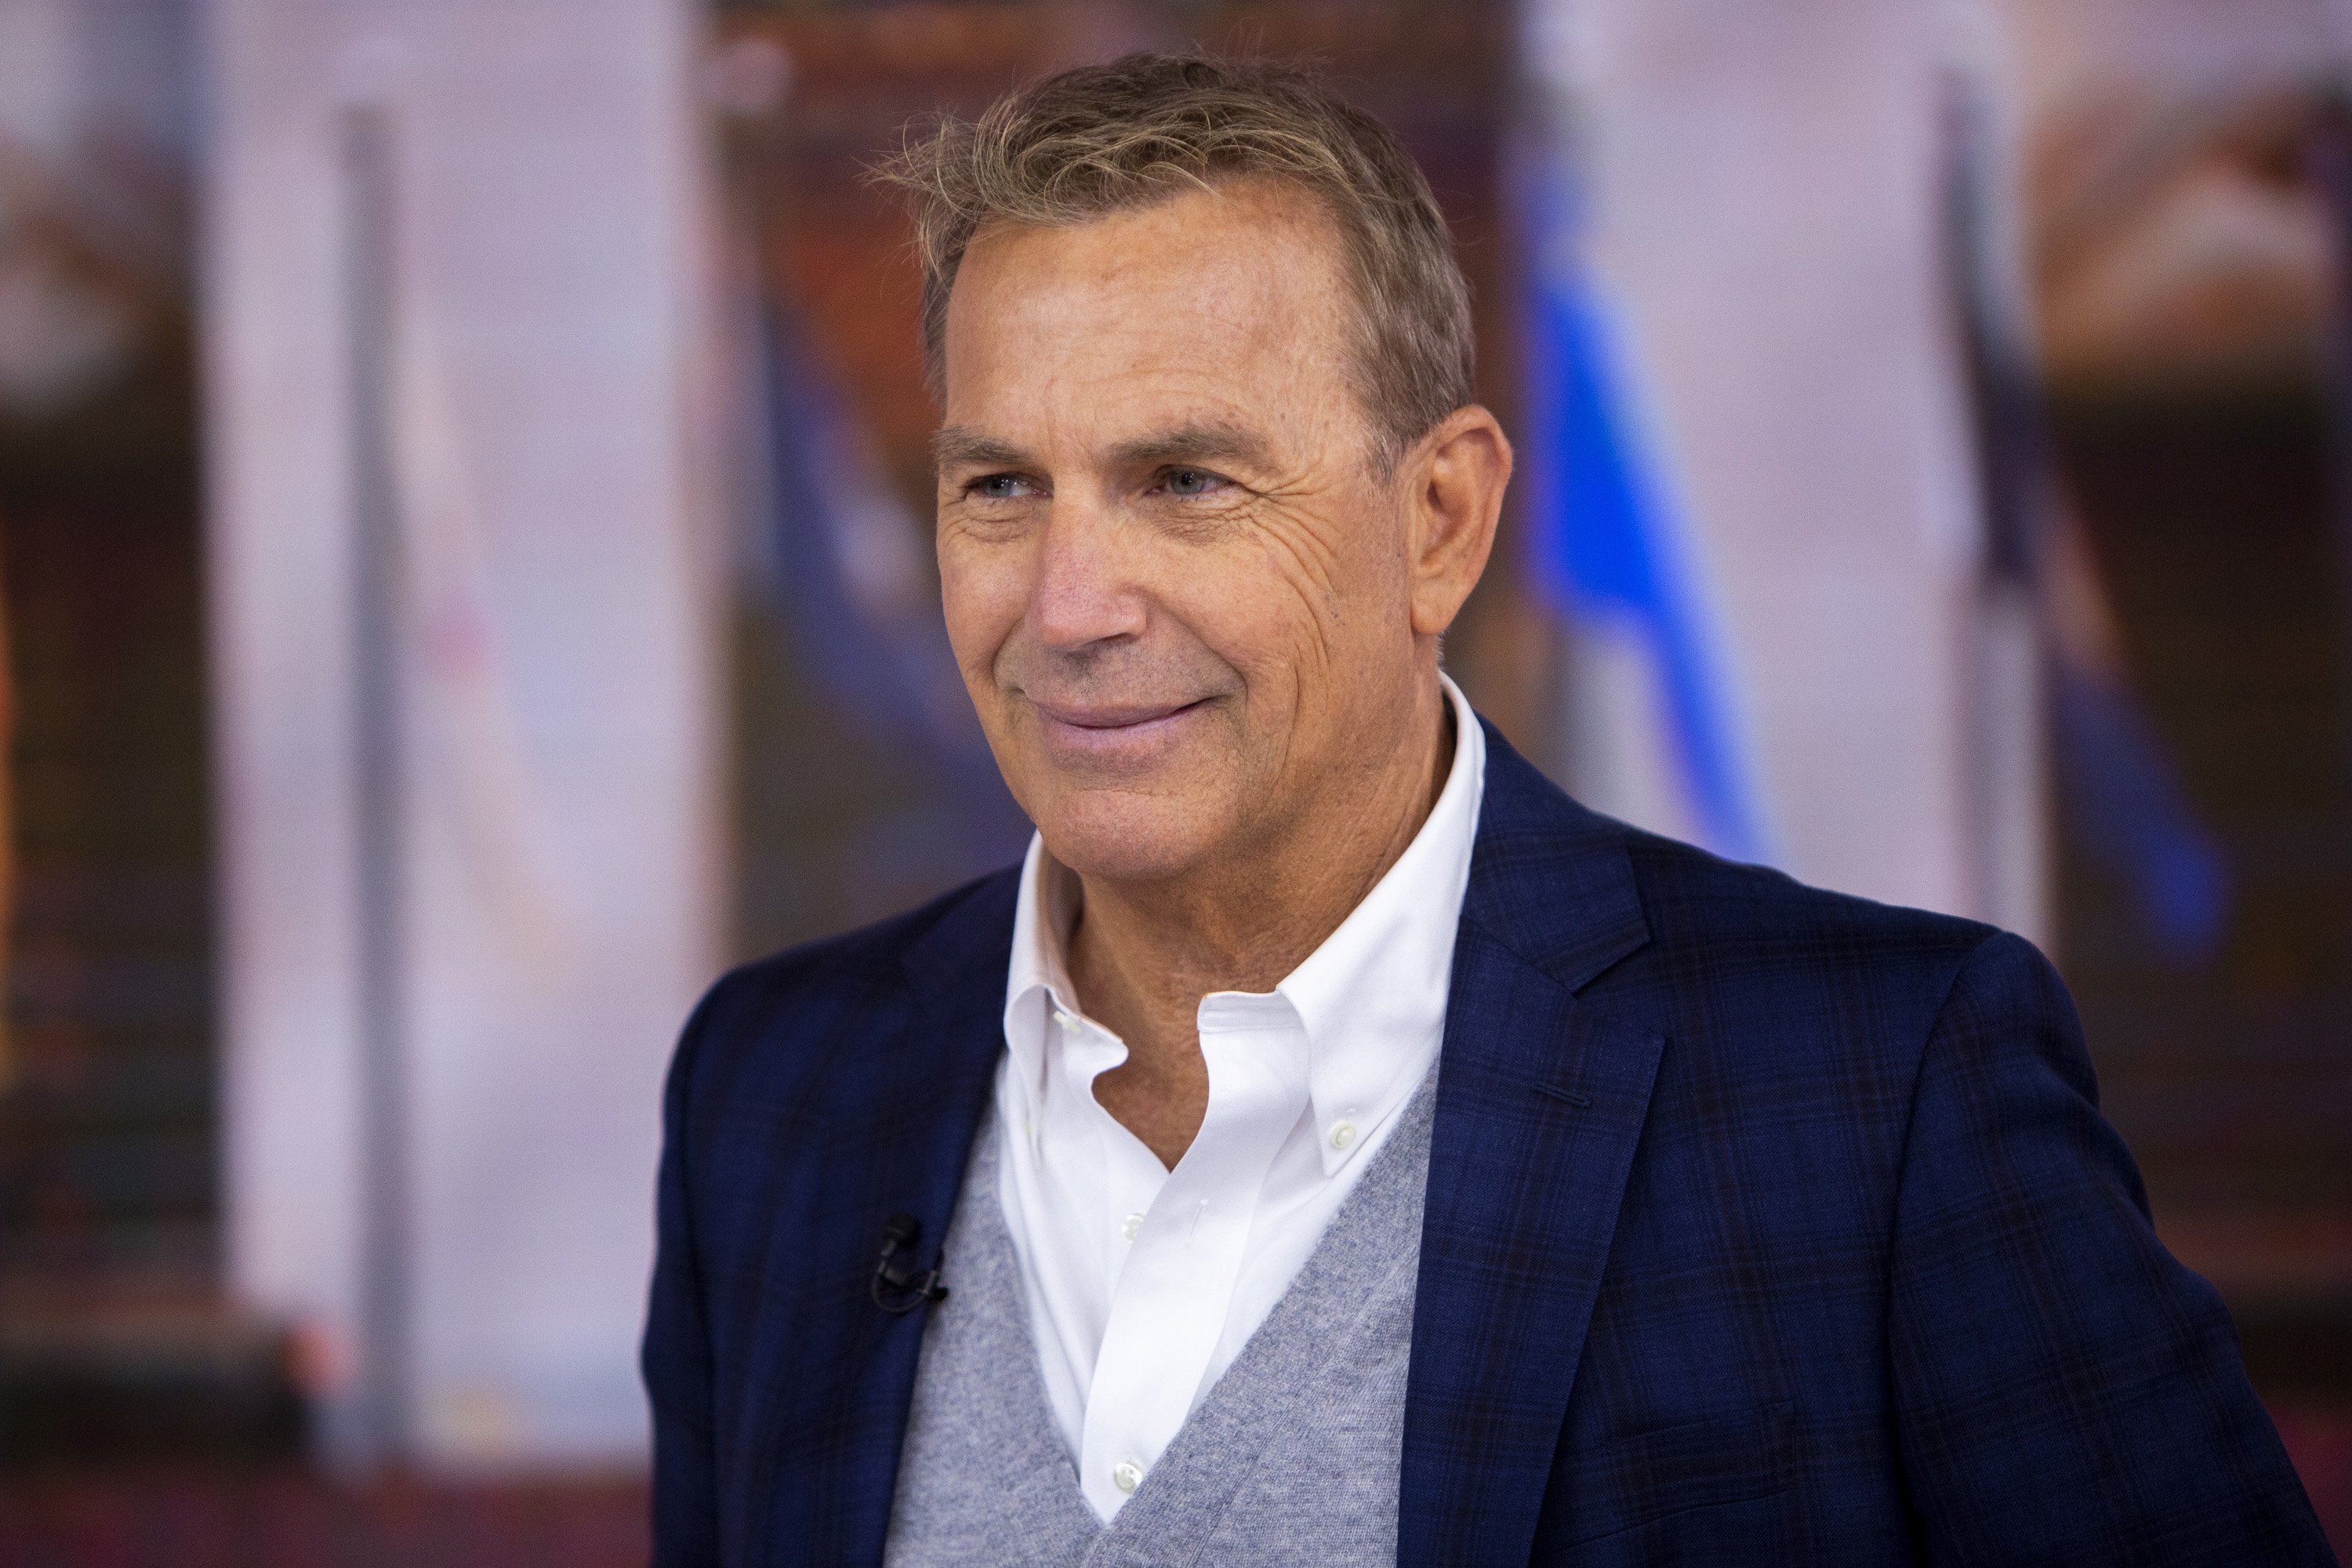 Kevin Costner on the "Today" show on March 28, 2019 | Photo: Getty Images